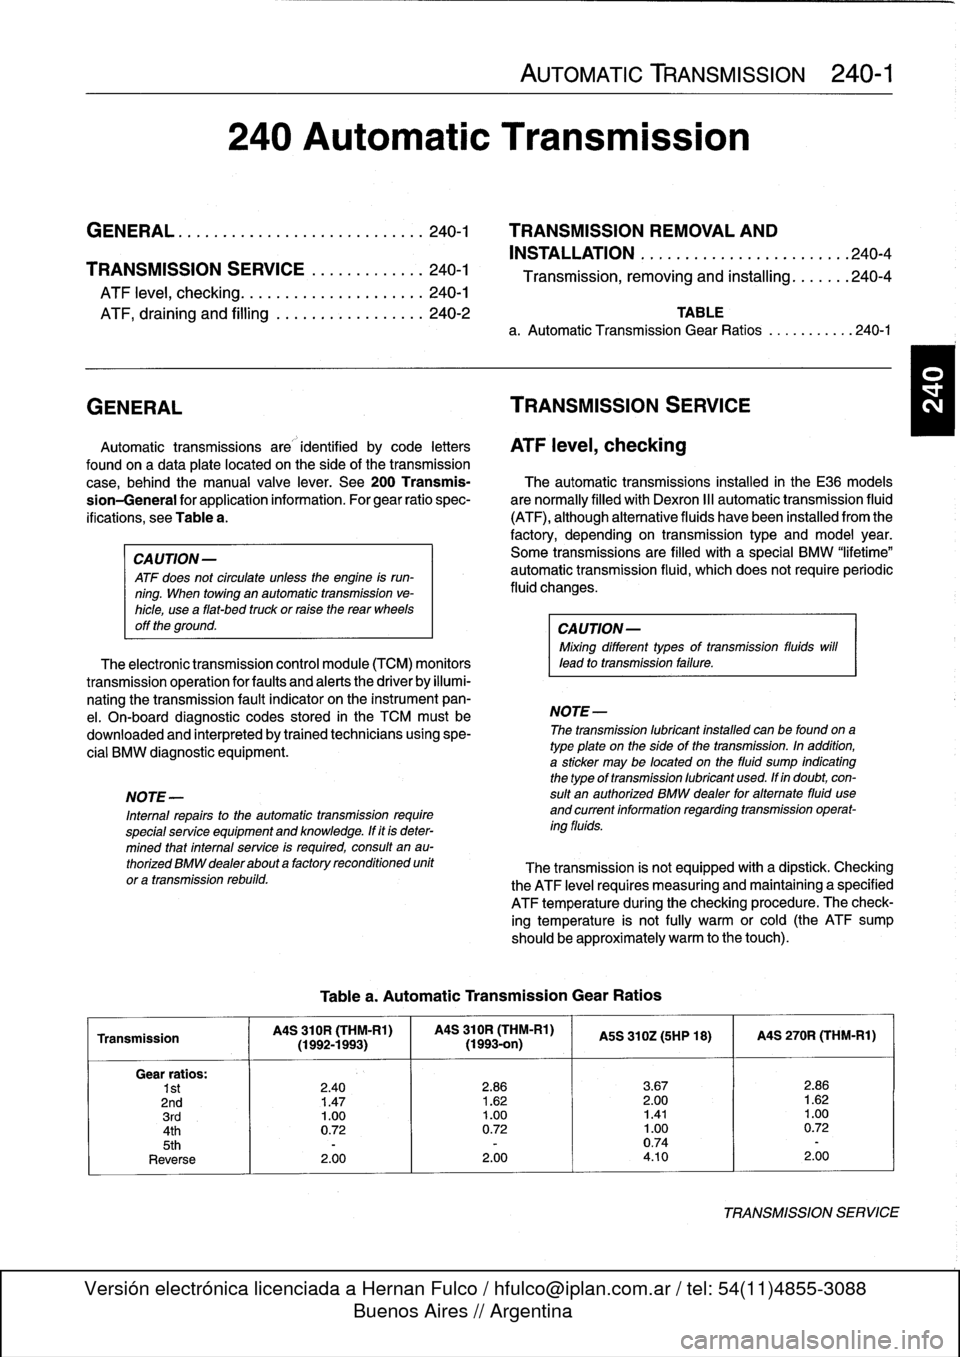 BMW 325i 1994 E36 Workshop Manual 
AUTOMATIC
TRANSMISSION

	

240-1

240
Automatic
Transmission

GENERAL
.....
.
.
.
.
.
.
.
.
.
.
.
.
.
.........
.
240-1

	

TRANSMISSION
REMOVAL
AND

INSTALLATION
..................
.
.
.
.
.240-4
TR